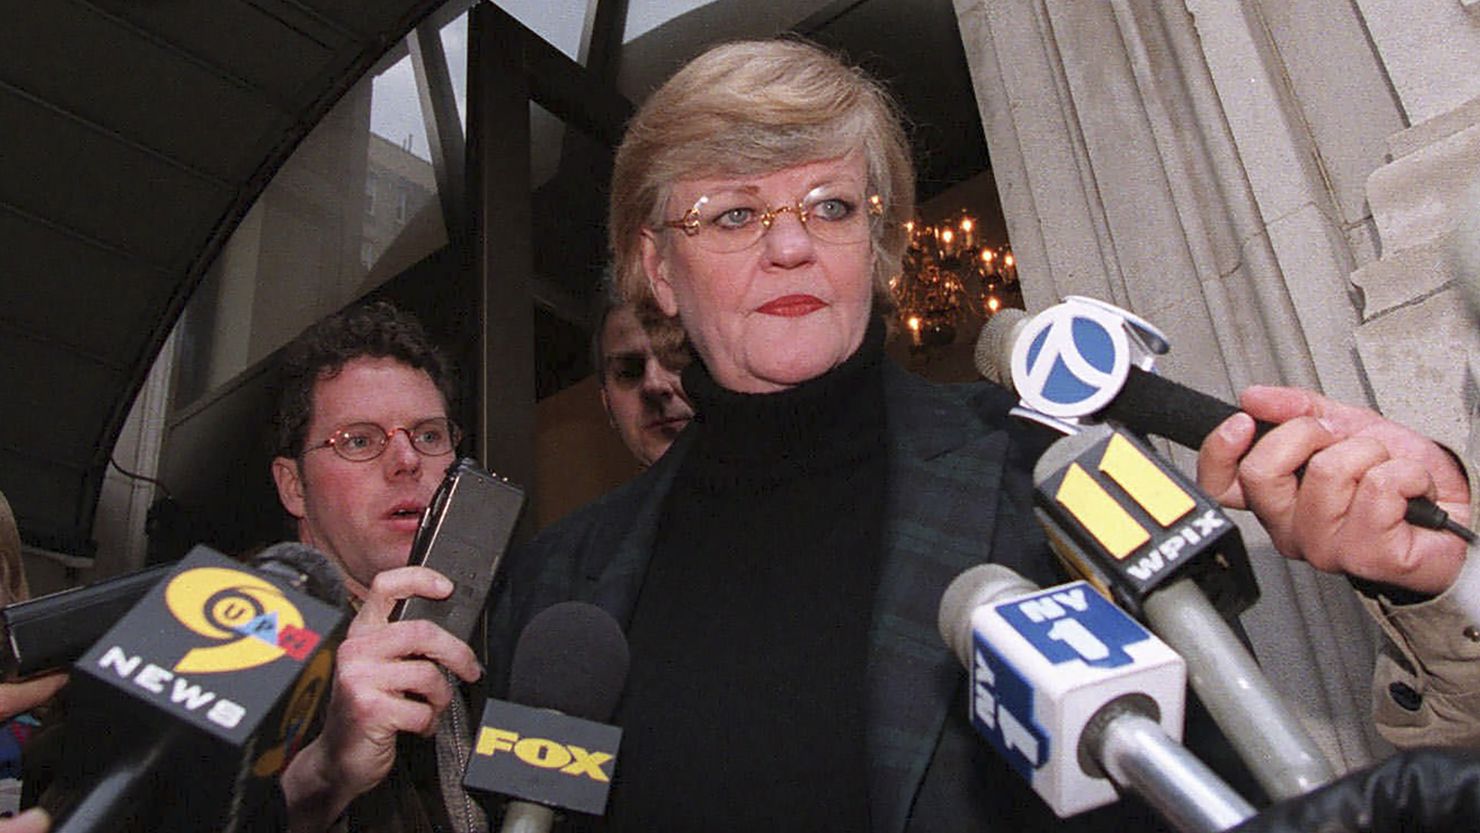 New York literary agent Lucianne Goldberg addresses a large assembly of media outside her apartment on January 24, 1998, in New York. 